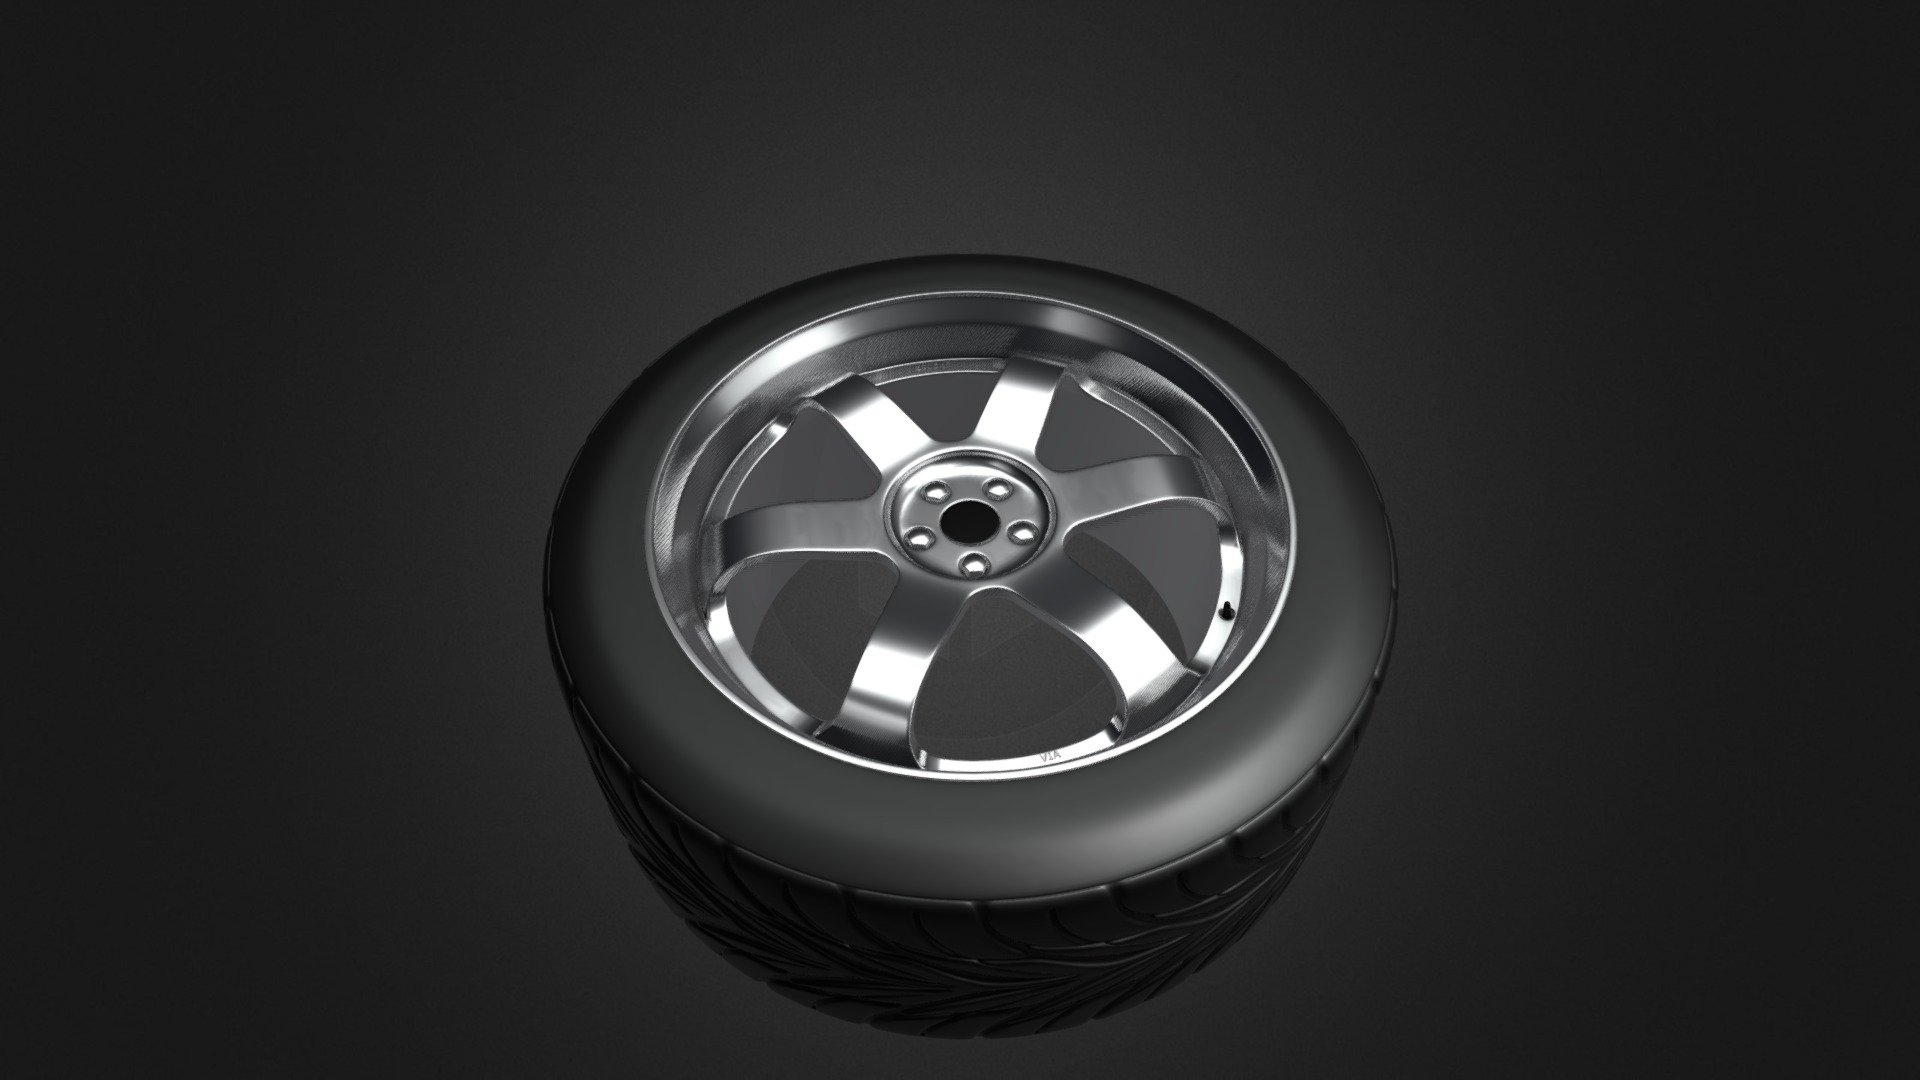 Just a wheel for my cars - Car wheel - Download Free 3D model by AngryBearr 3d model